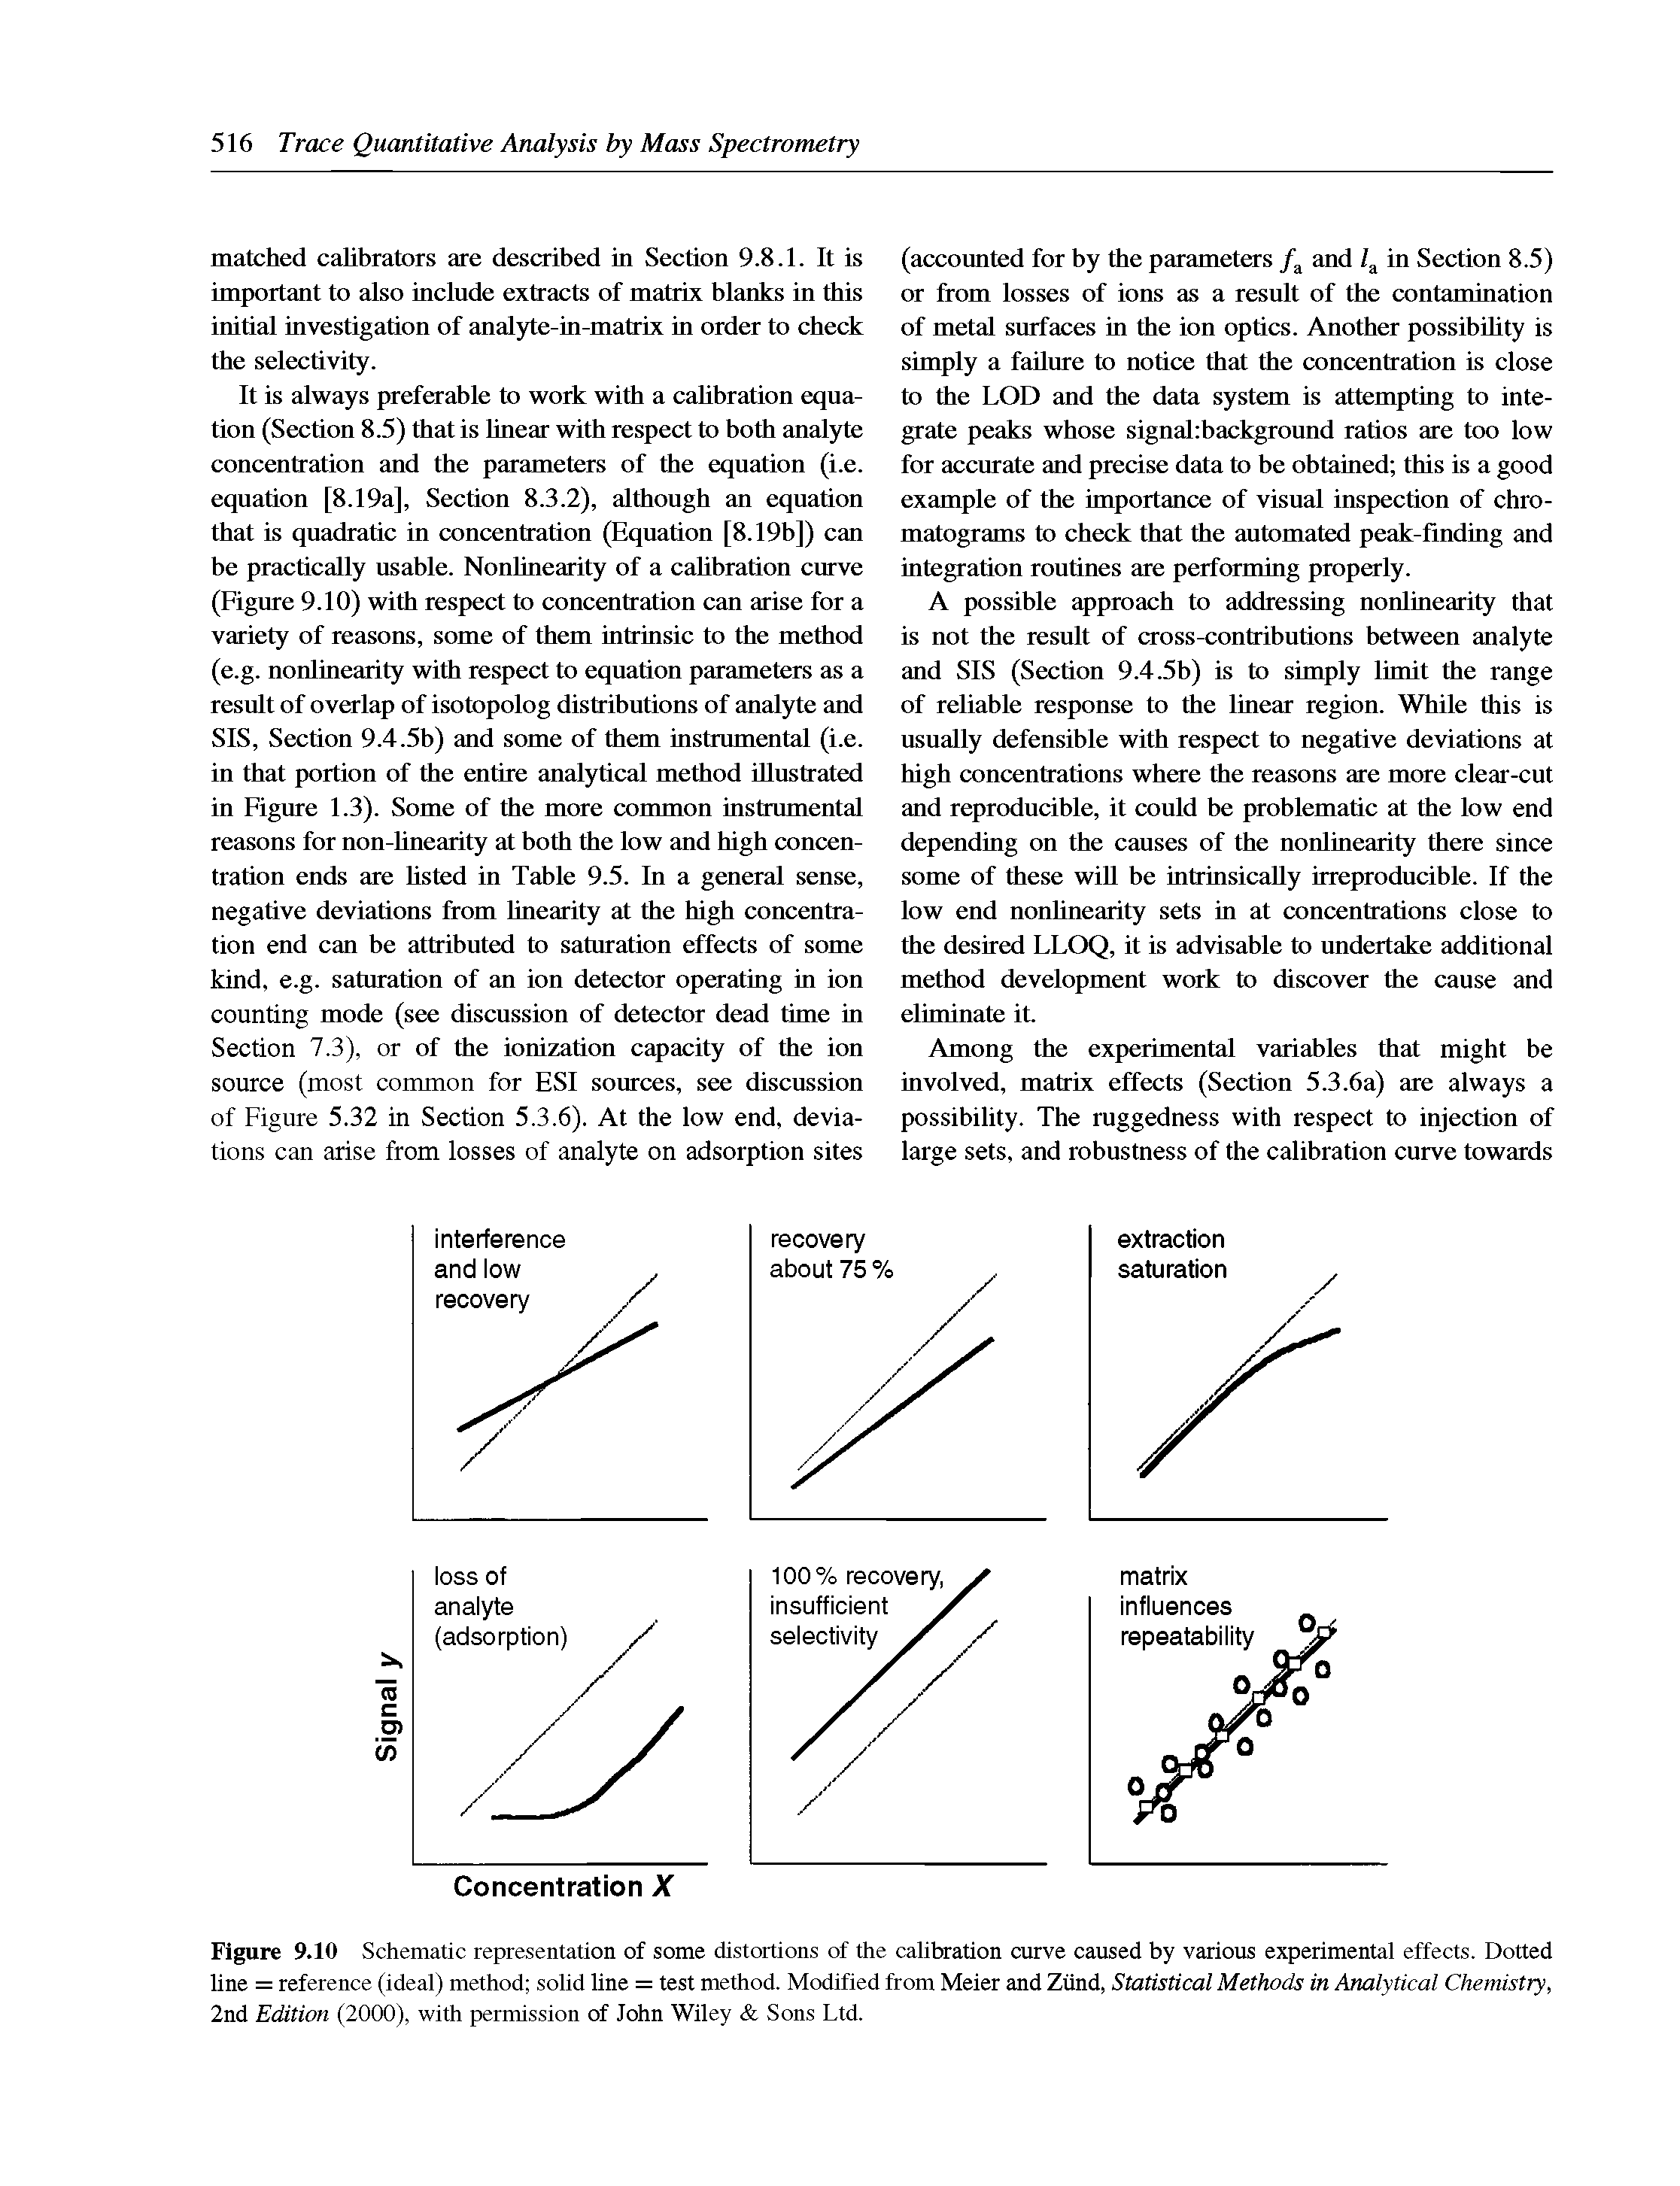 Figure 9.10 Schematic representation of some distortions of the calibration curve caused by various experimental effects. Dotted line = reference (ideal) method solid line = test method. Modified from Meier and Ziind, Statistical Methods in Analytical Chemistry, 2nd Edition (2000), with permission of John Wiley Sons Ltd.